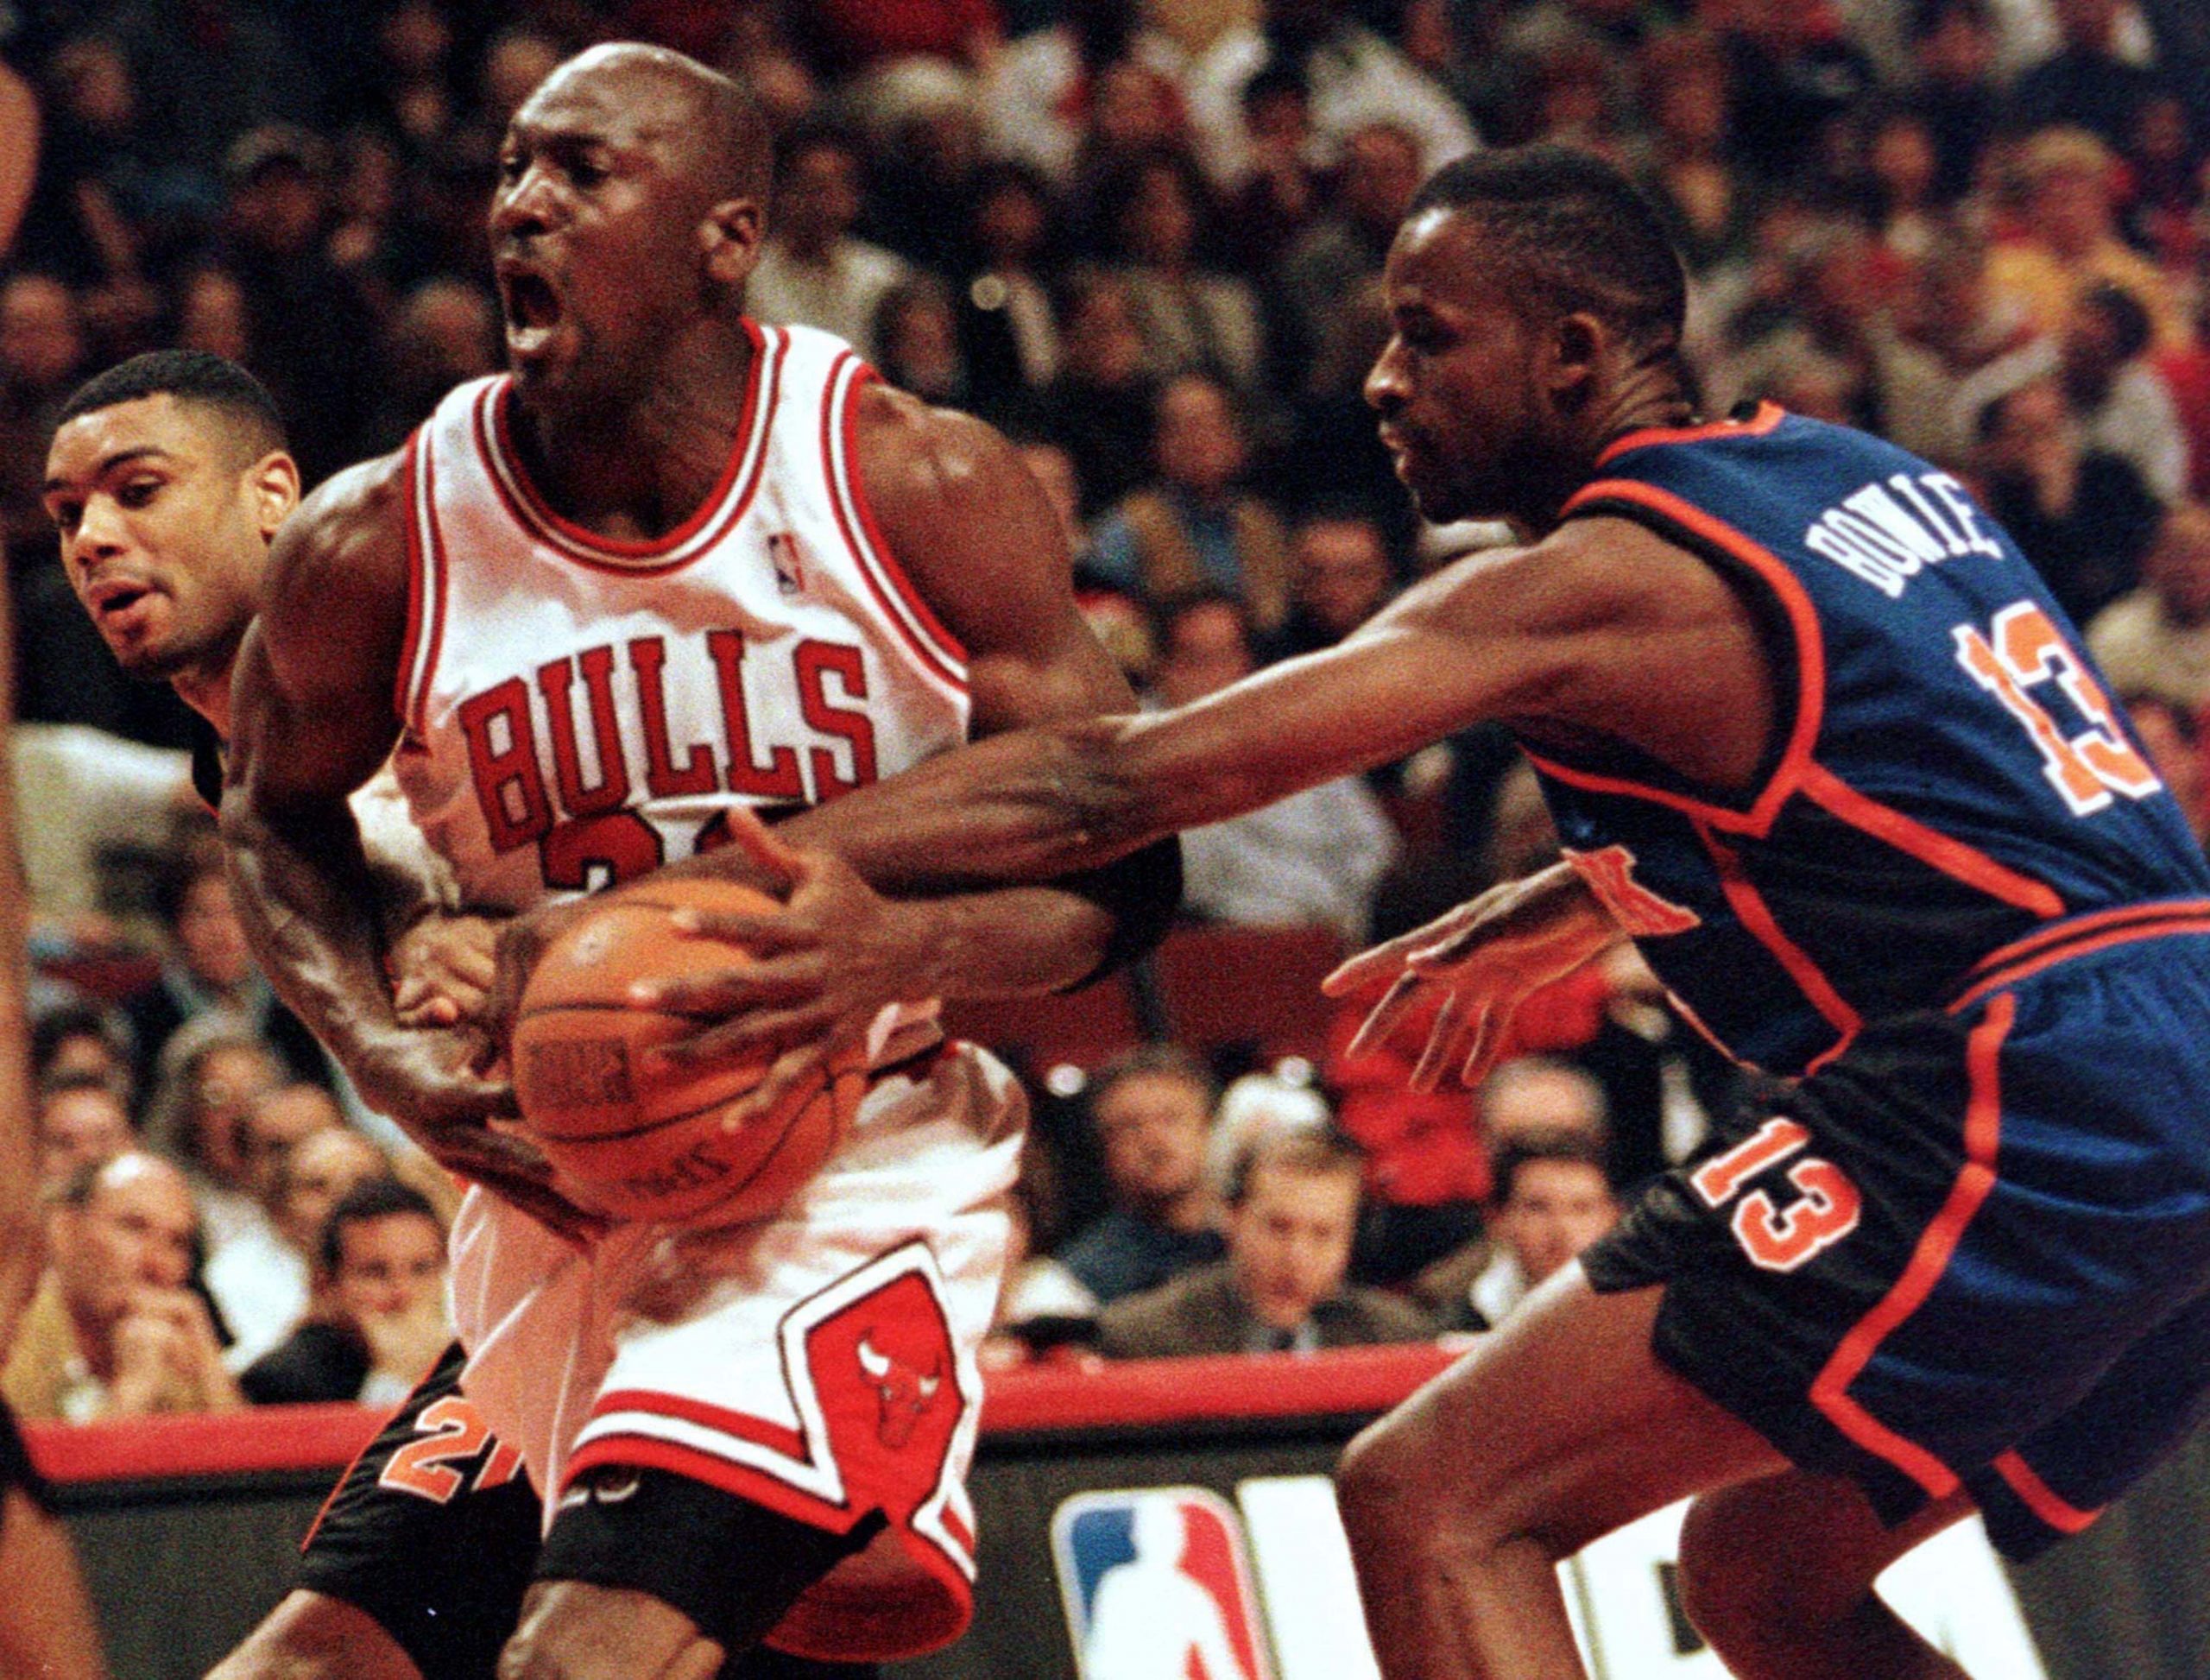 Looking back at Bulls domination of Knicks as ESPN airs “The Last Dance